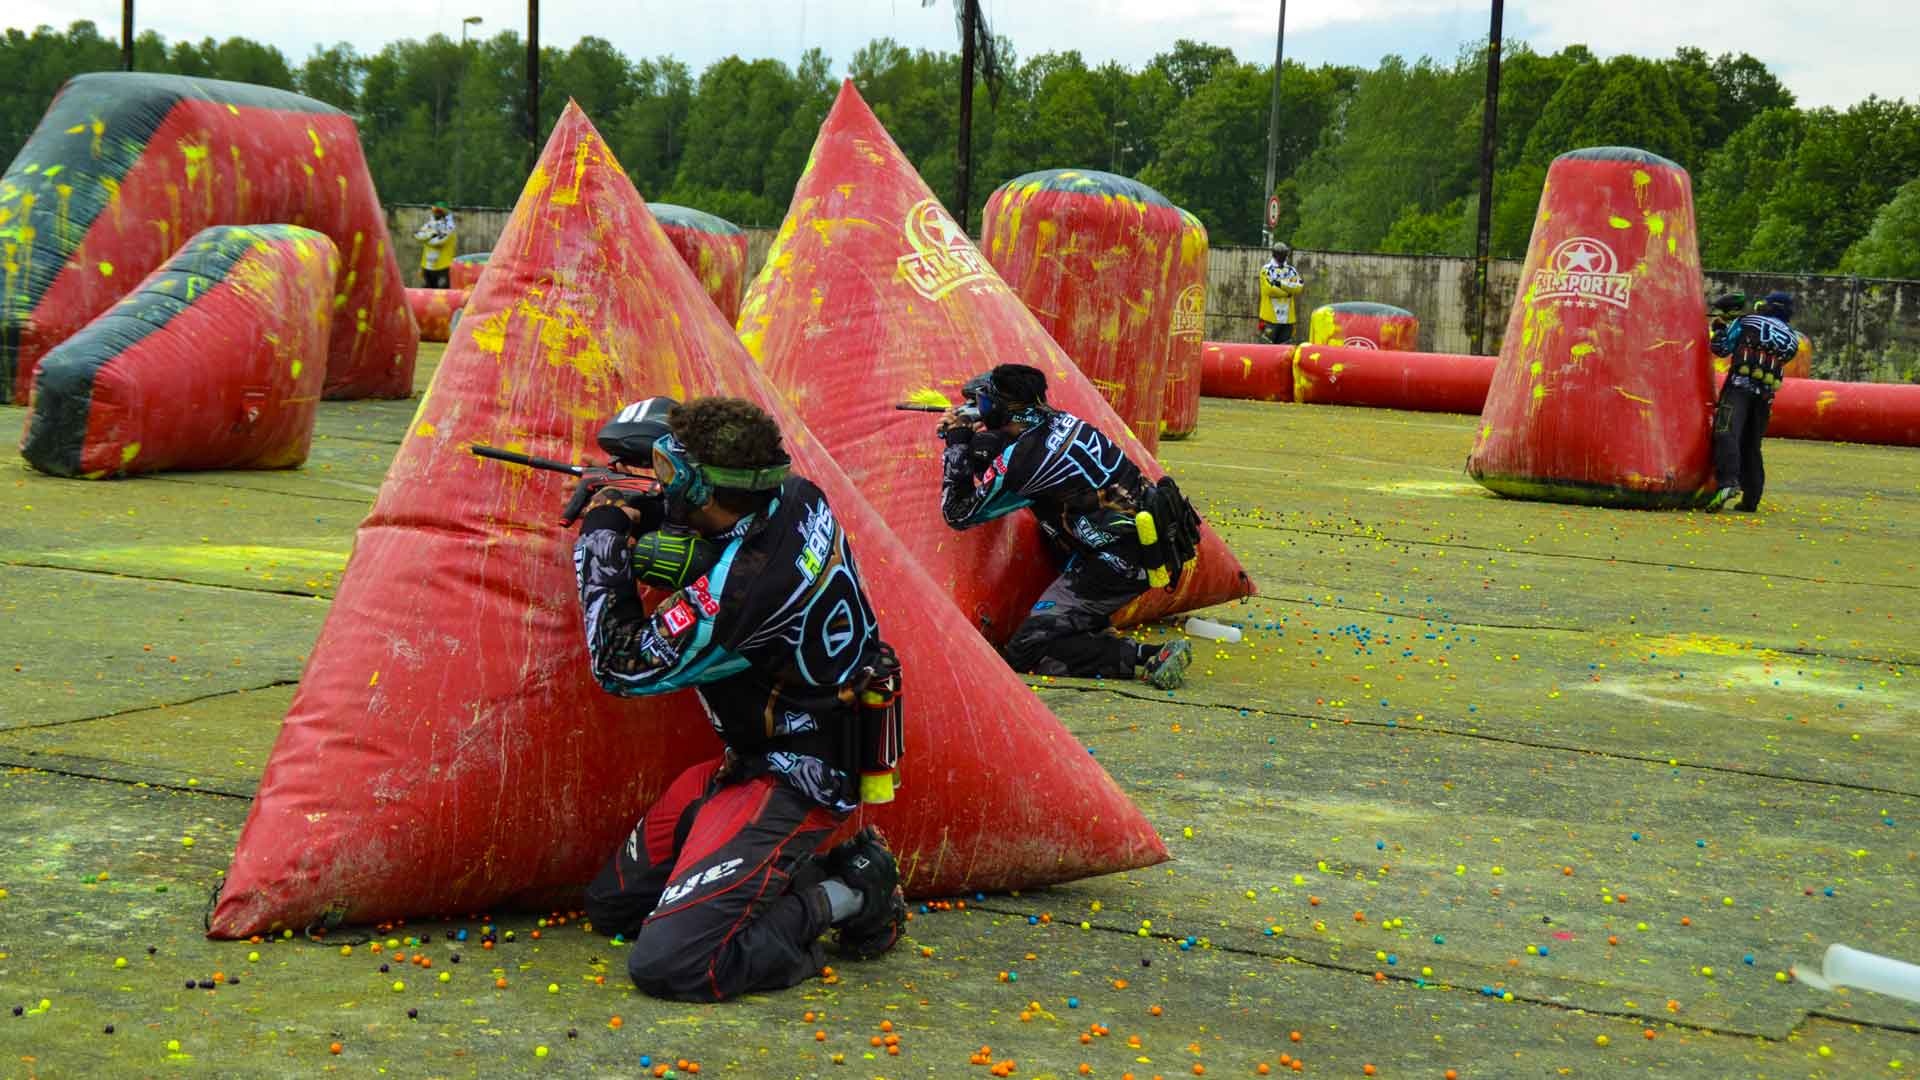 Paintball: Speedball style of a popular shooting game, Two teams compete on equal playing fields. 1920x1080 Full HD Wallpaper.